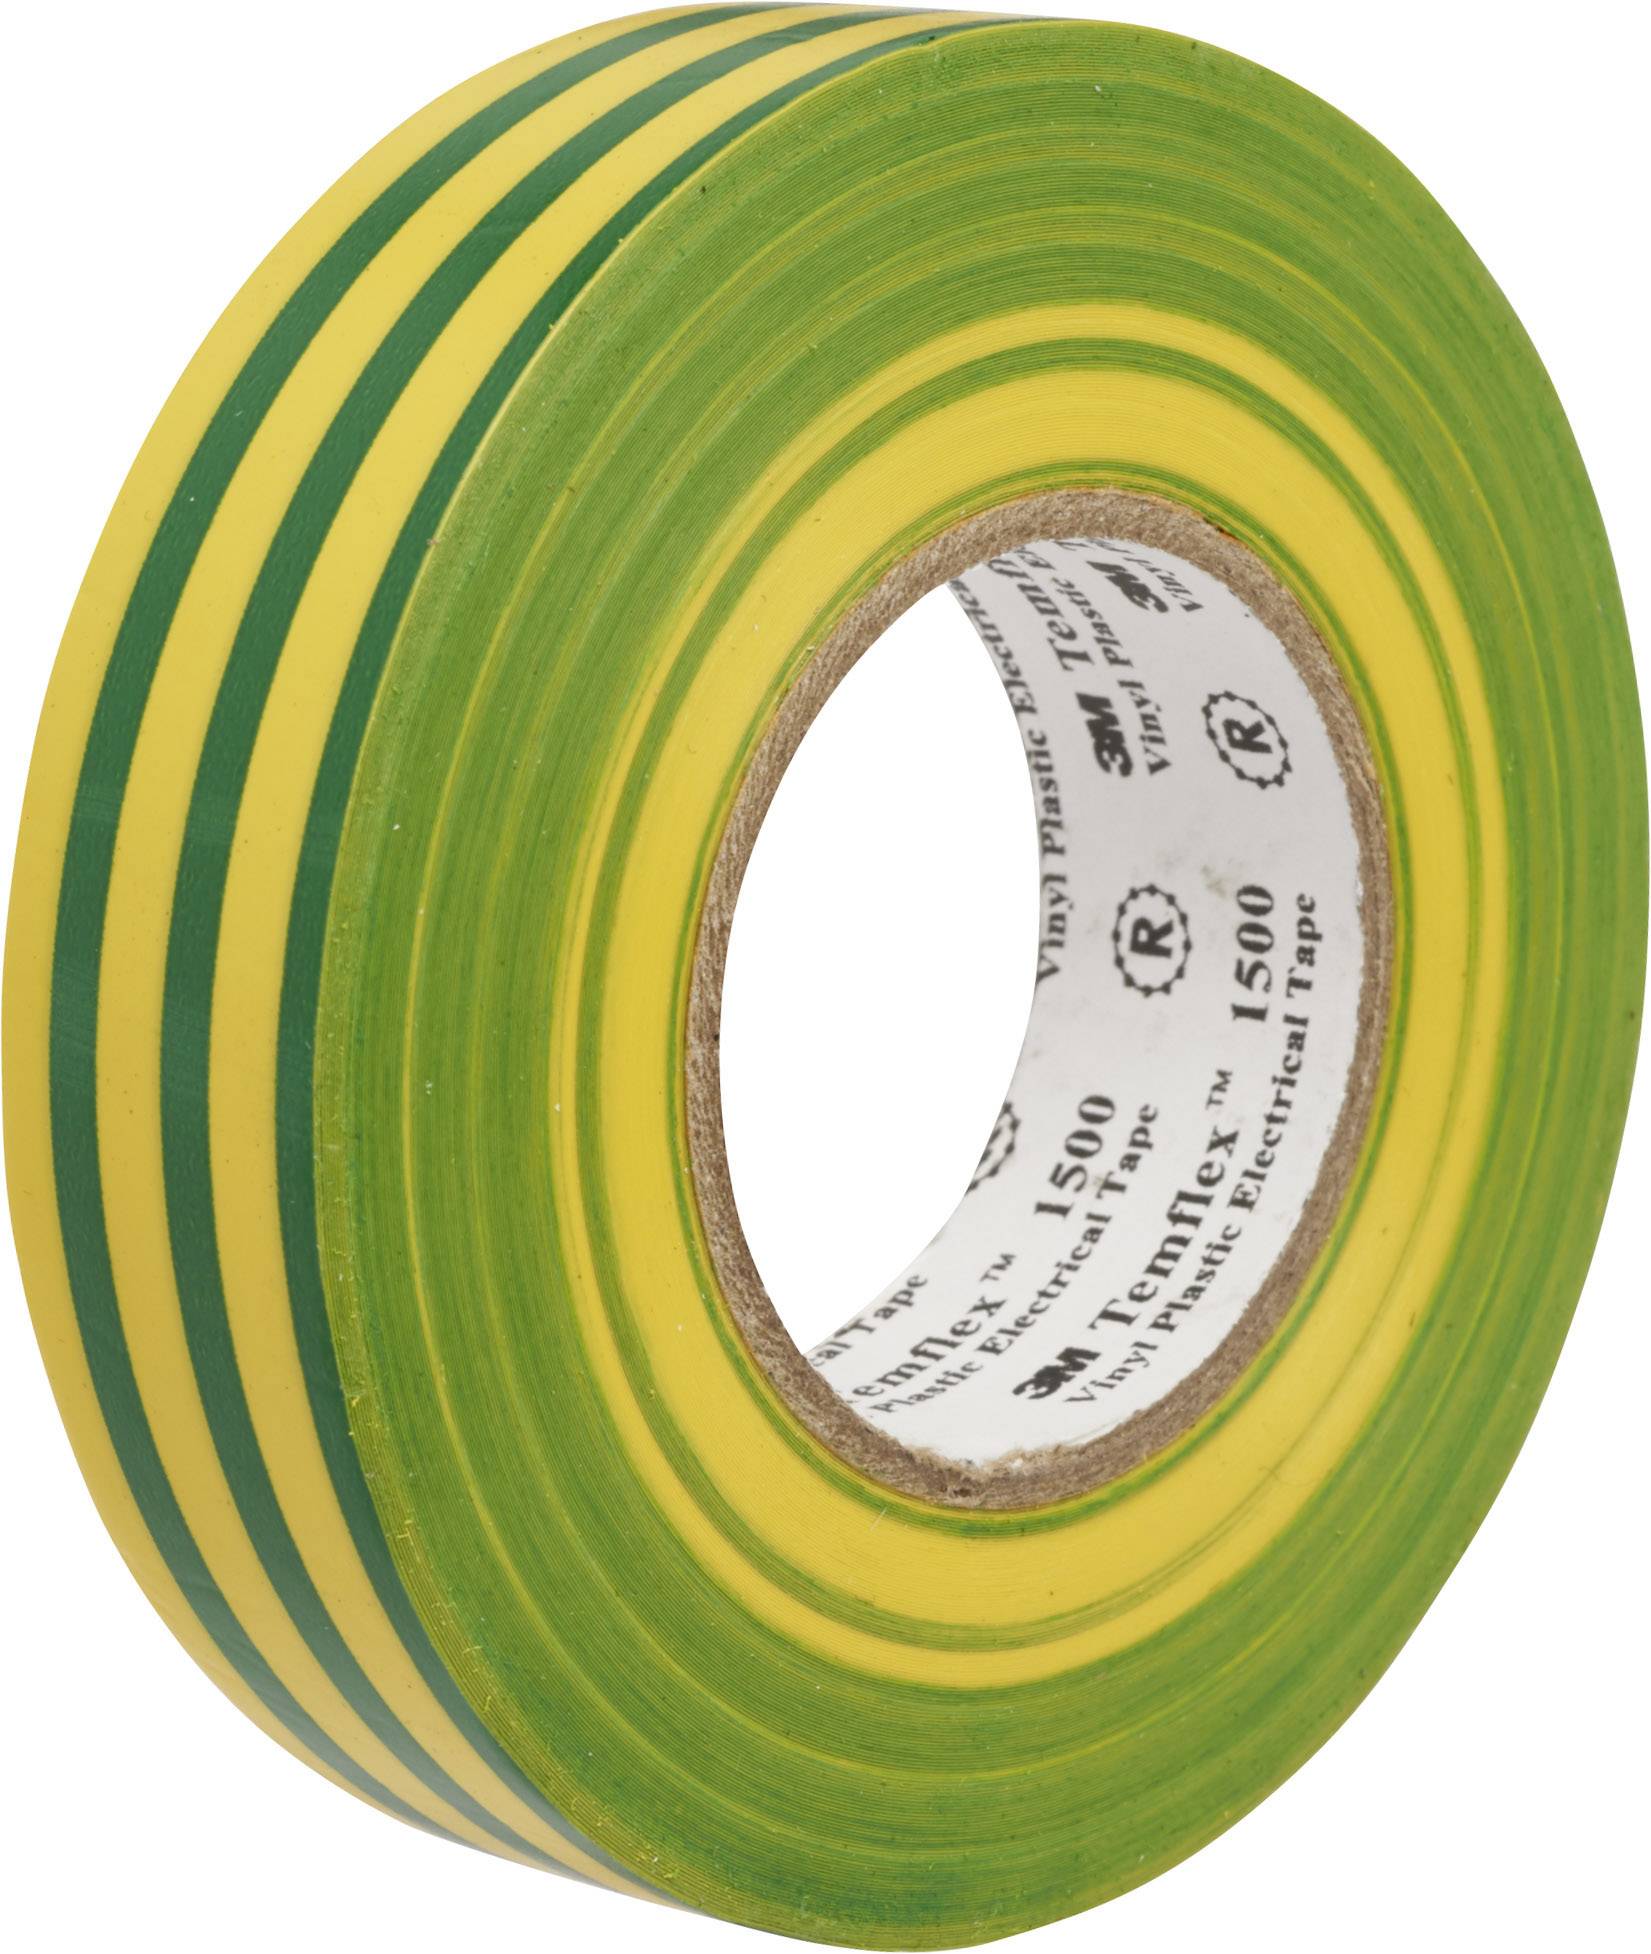 Yellow PVC Tape 19mm x 5 Metres Electrical Tape Insulation Tape 